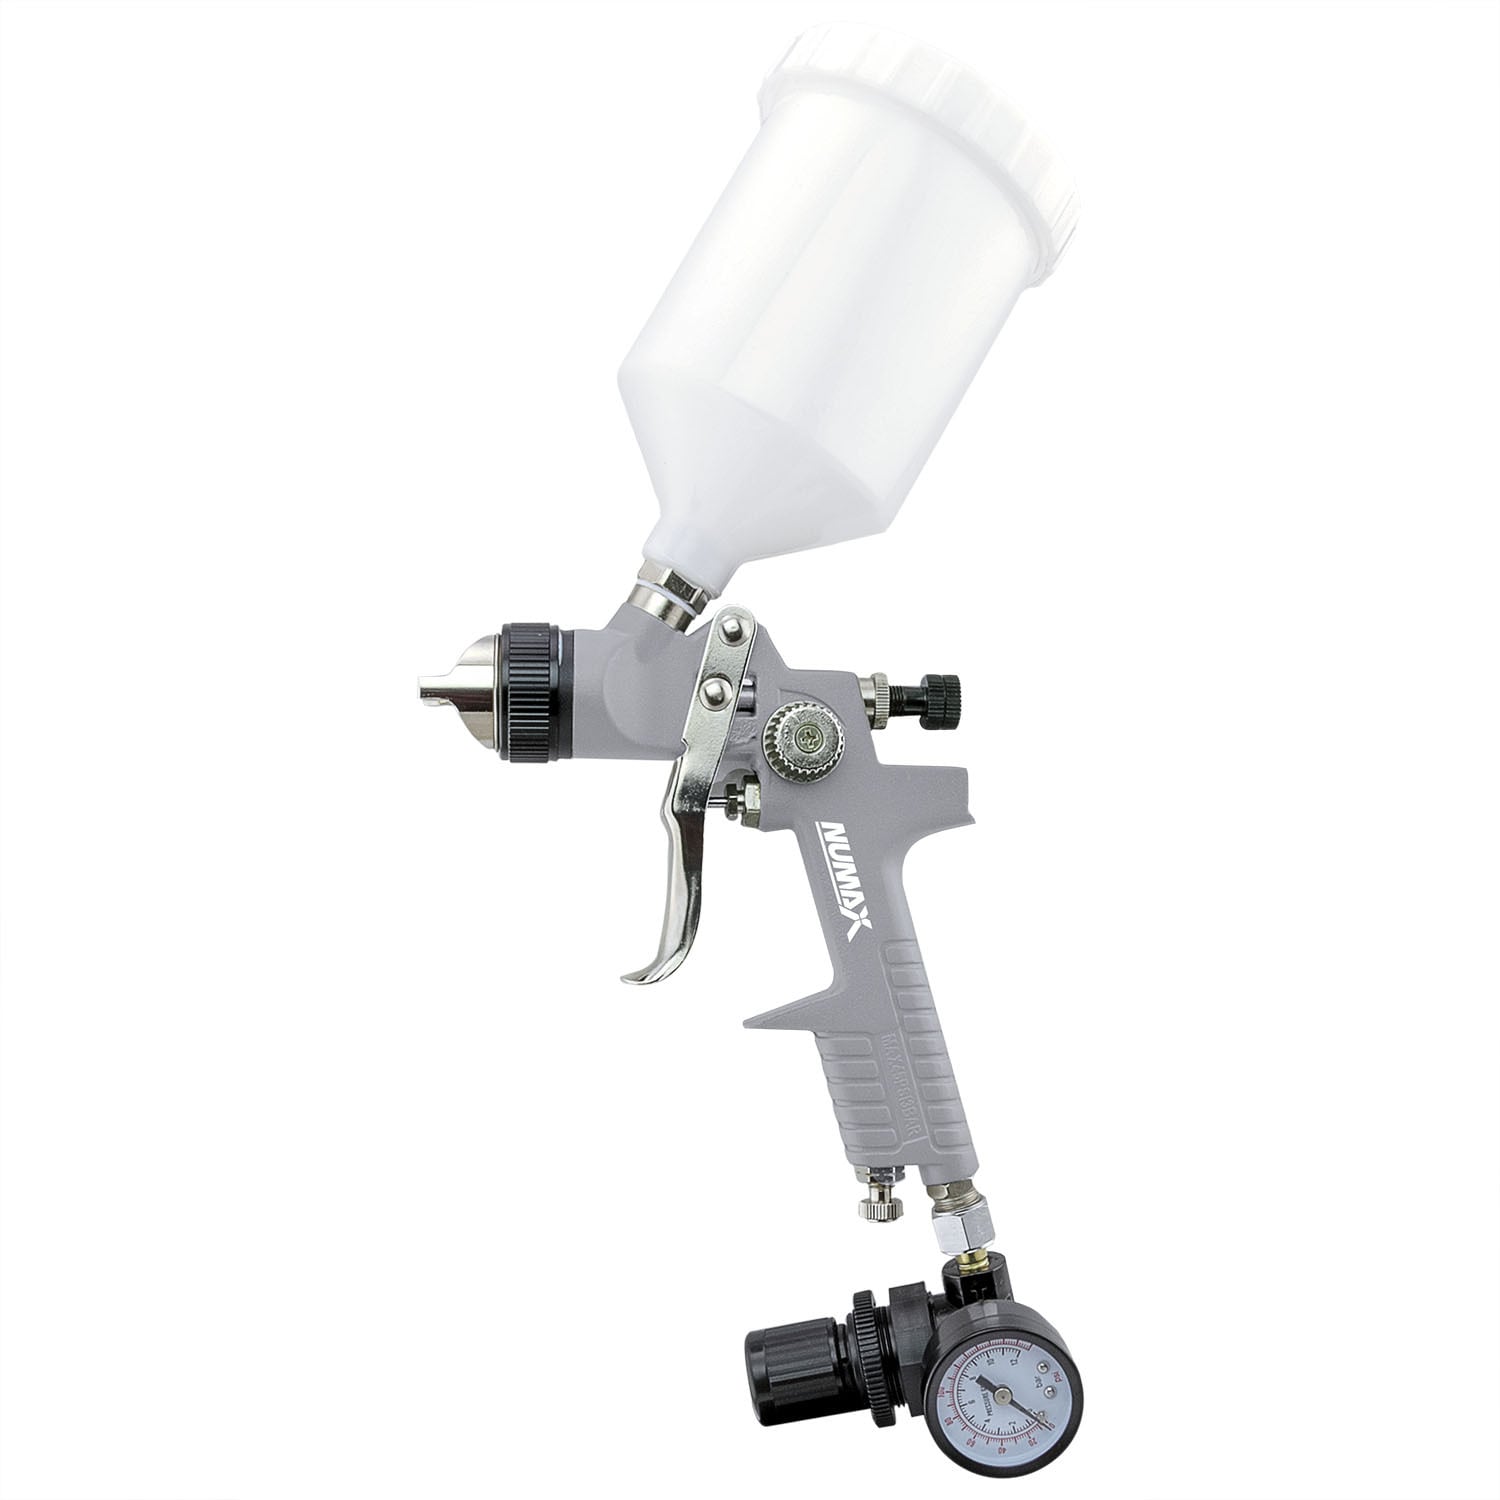 Pneumatic Spray Gun, 30 to 120psi Even Spraying Pneumatic Spray Gun  Pressure Feed Hand Air Paint Sprayer with 25ounce Suction Liquid Cup 750ml  for